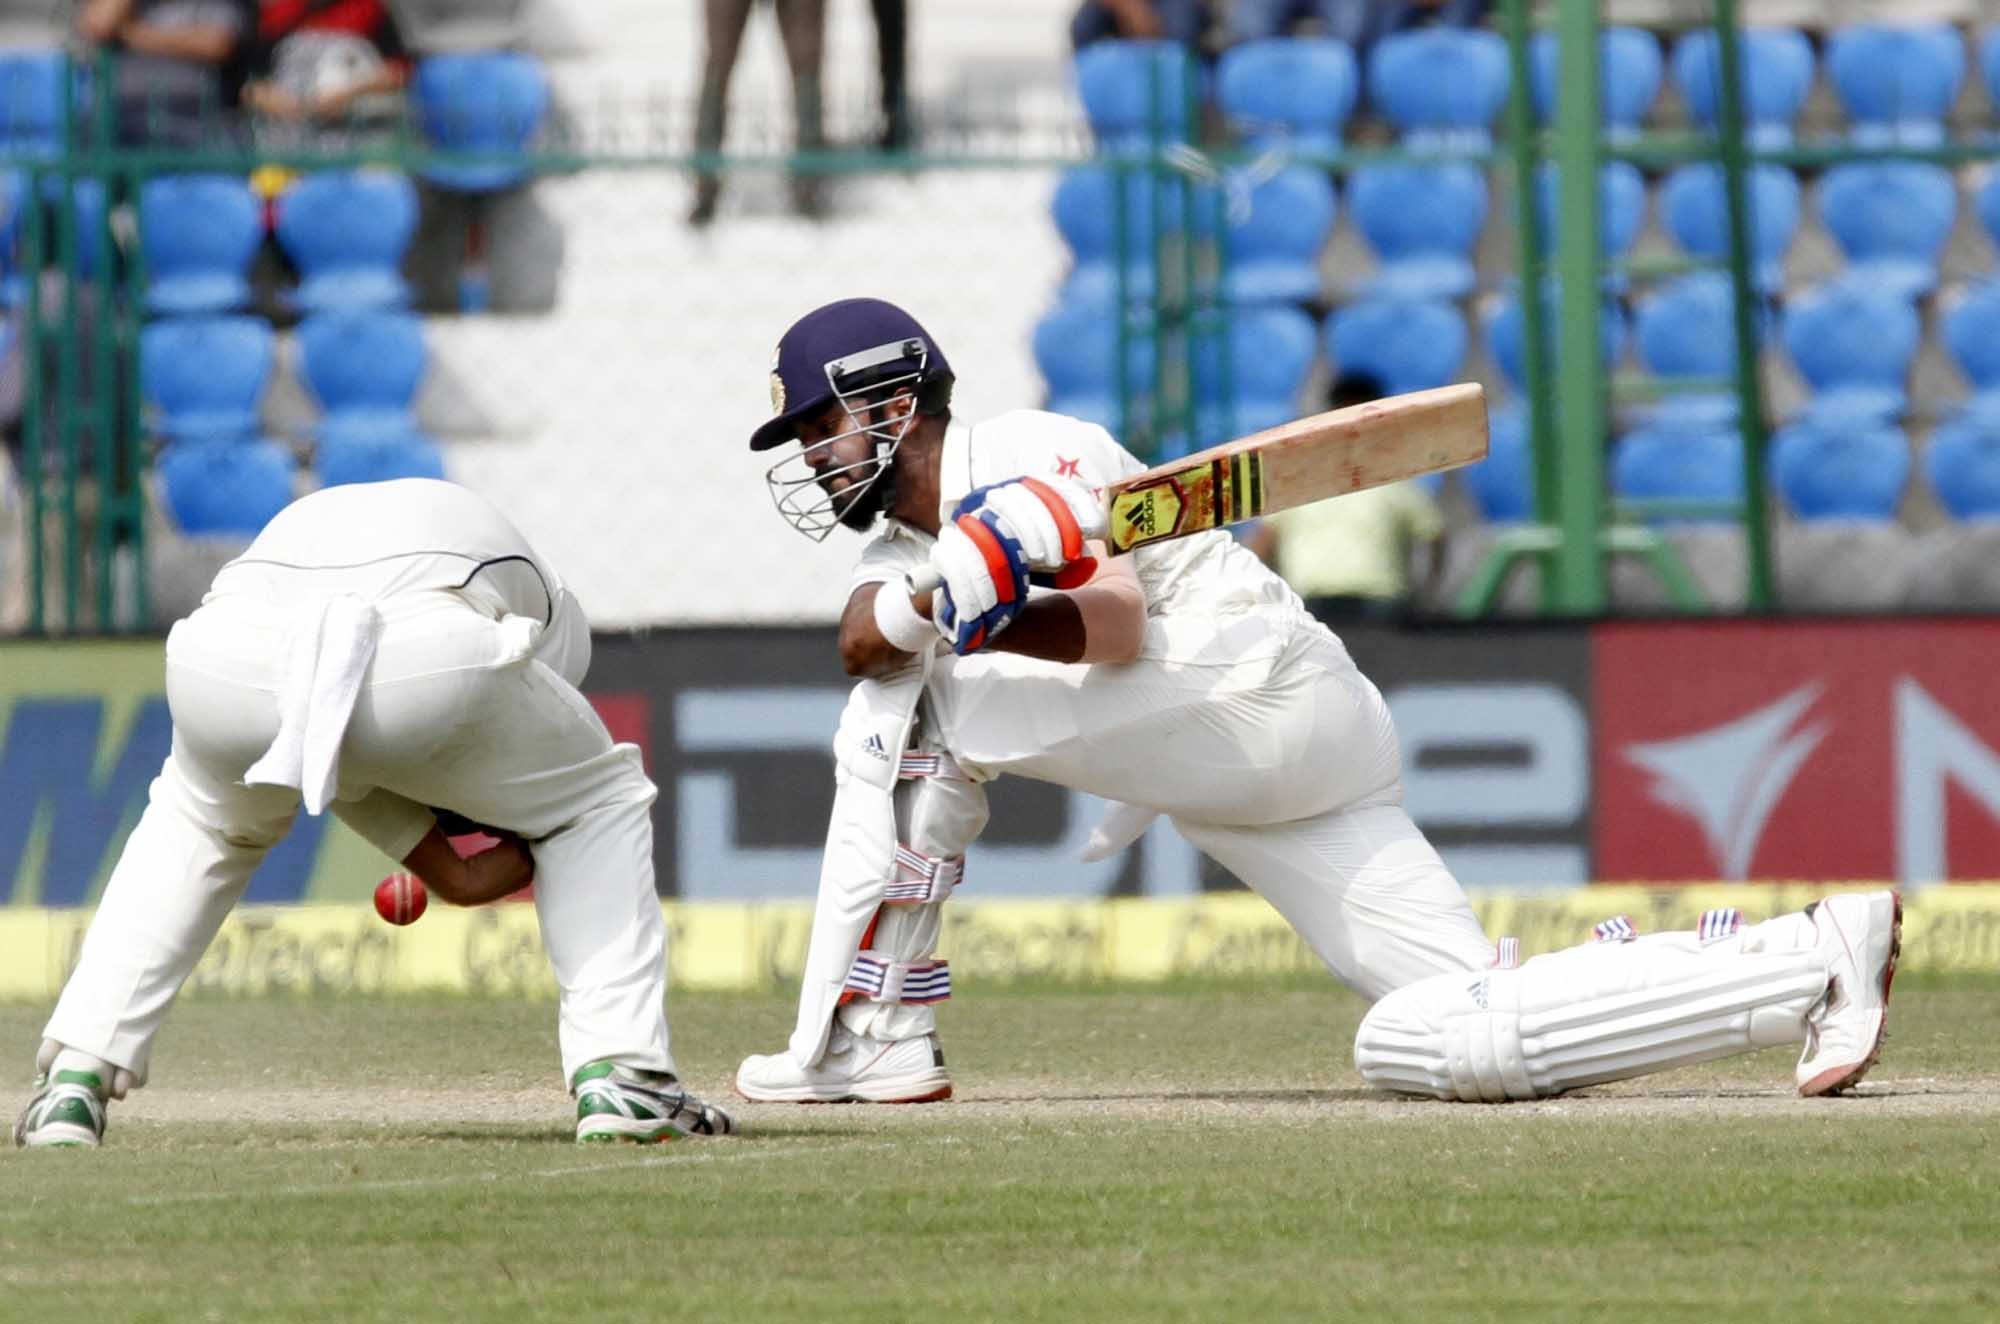 Fifth Test: Rahul misses double ton as India post 391/4